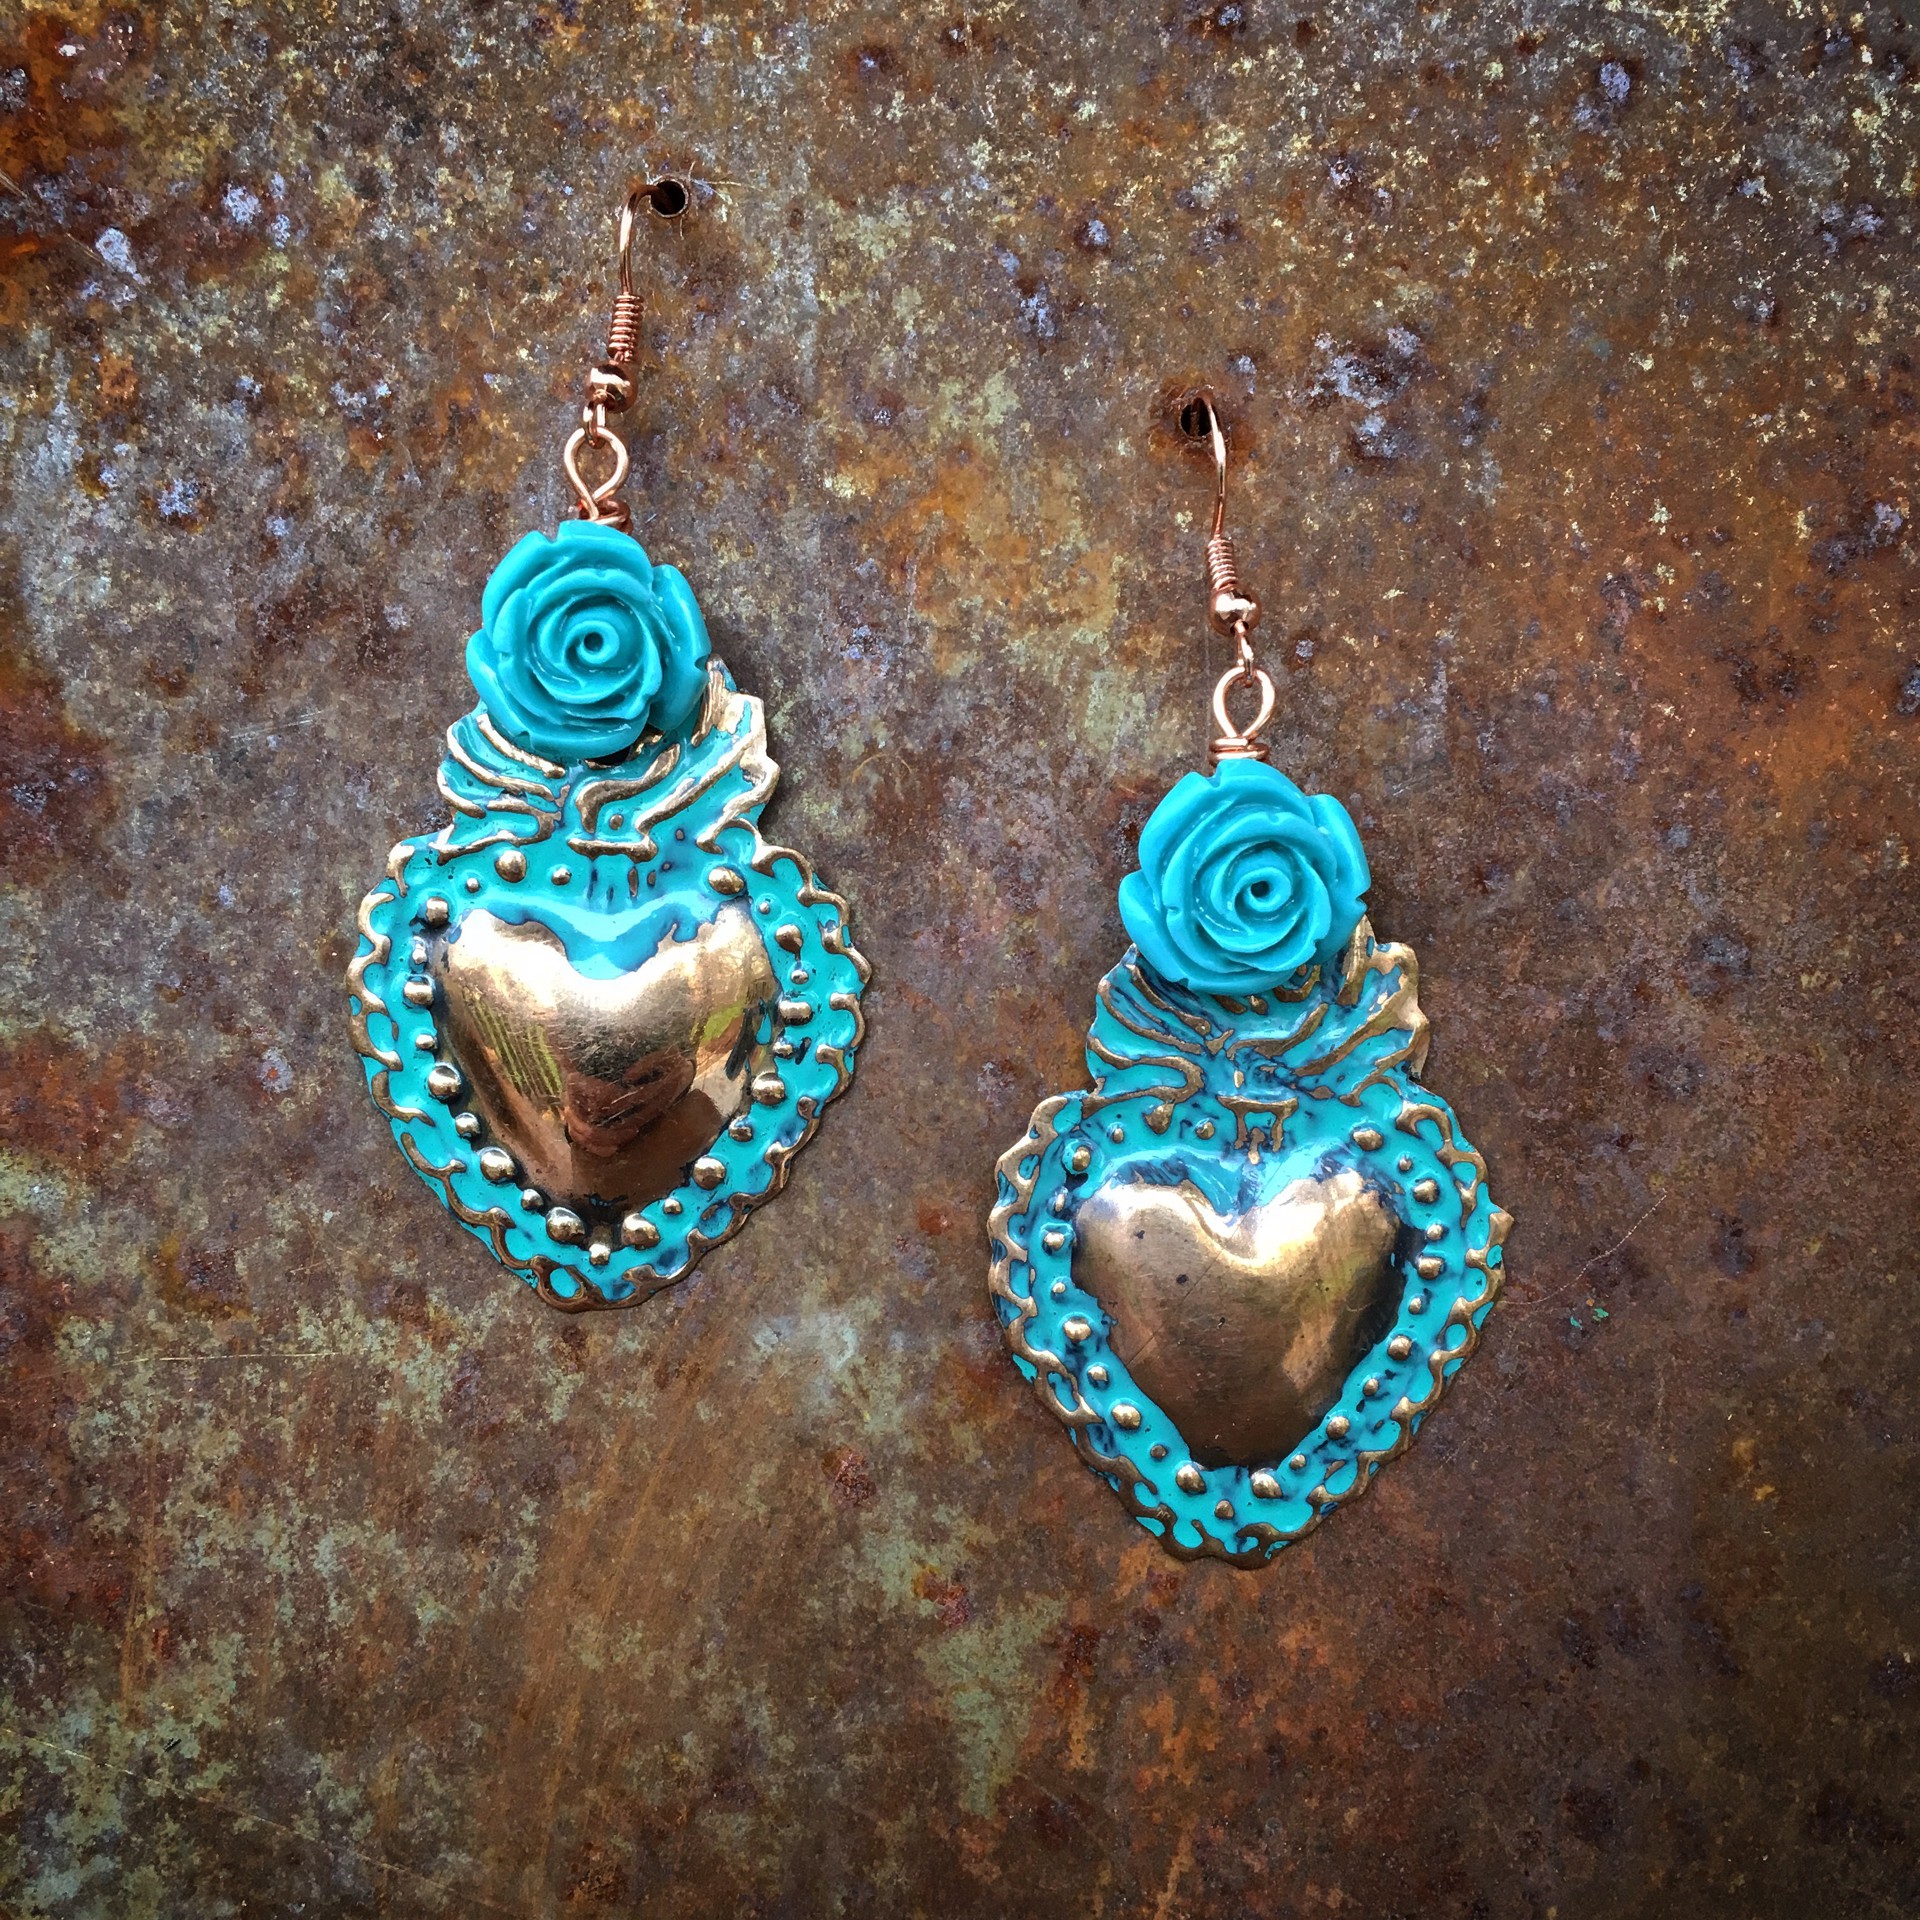 K338 Sm Copper SH Turquoise Rose Earrings by Kelly Ormsby